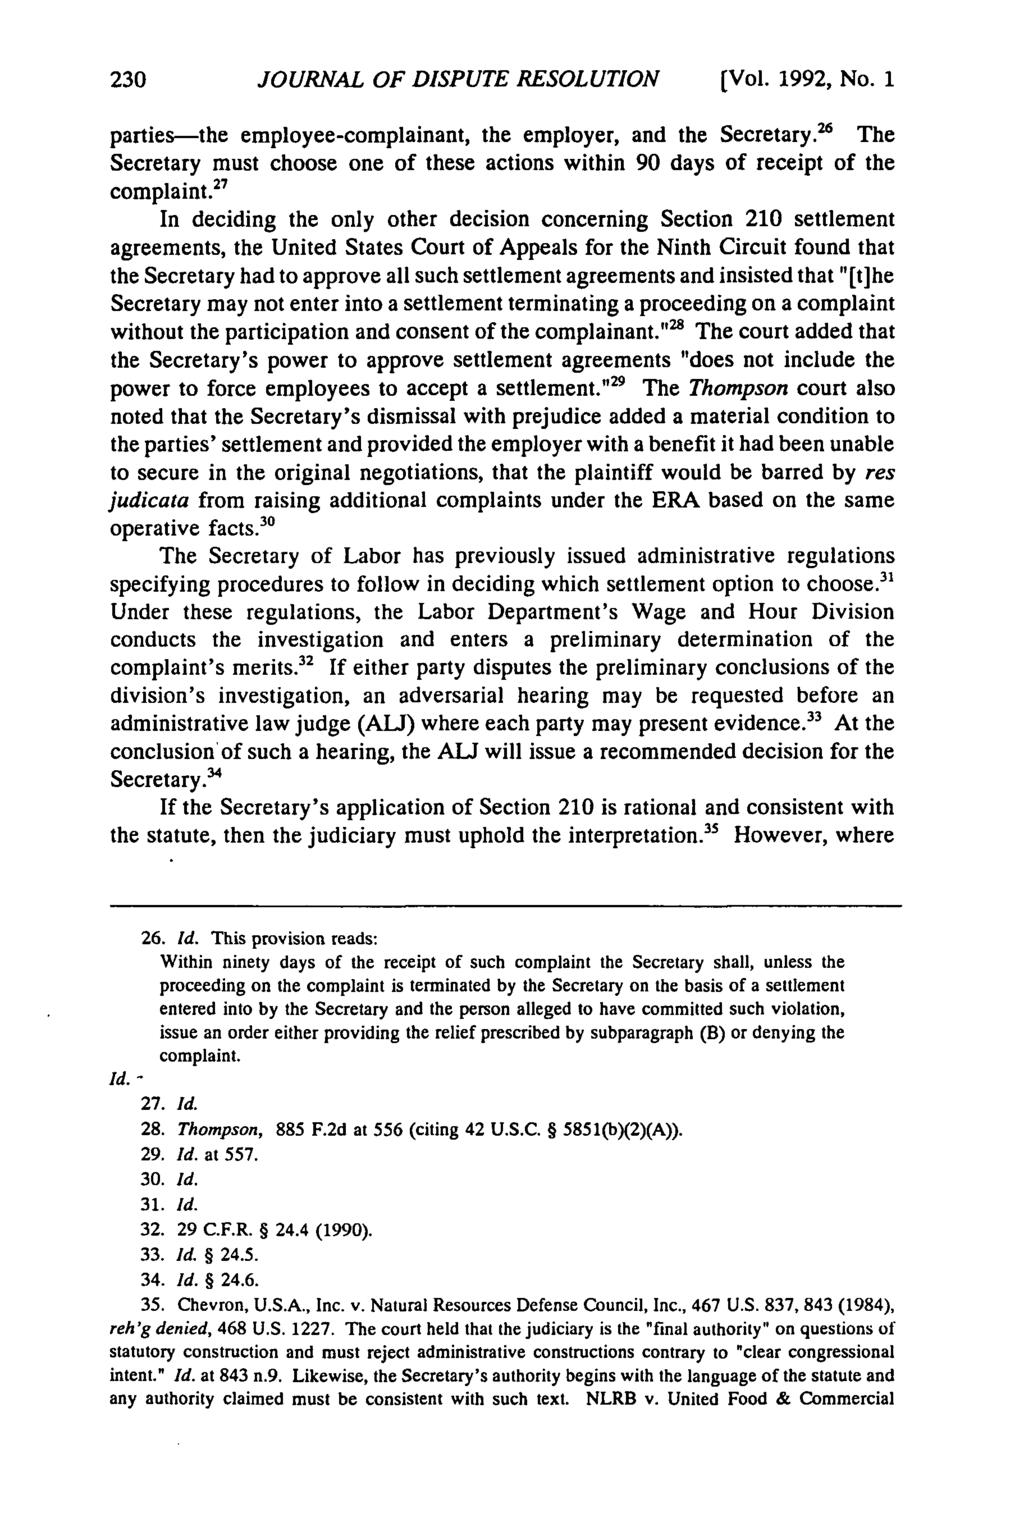 Journal of Dispute Resolution, Vol. 1992, Iss. 1 [1992], Art. 13 JOURNAL OF DISPUTE RESOLUTION (Vol. 1992, No. 1 parties-the employee-complainant, the employer, and the Secretary.